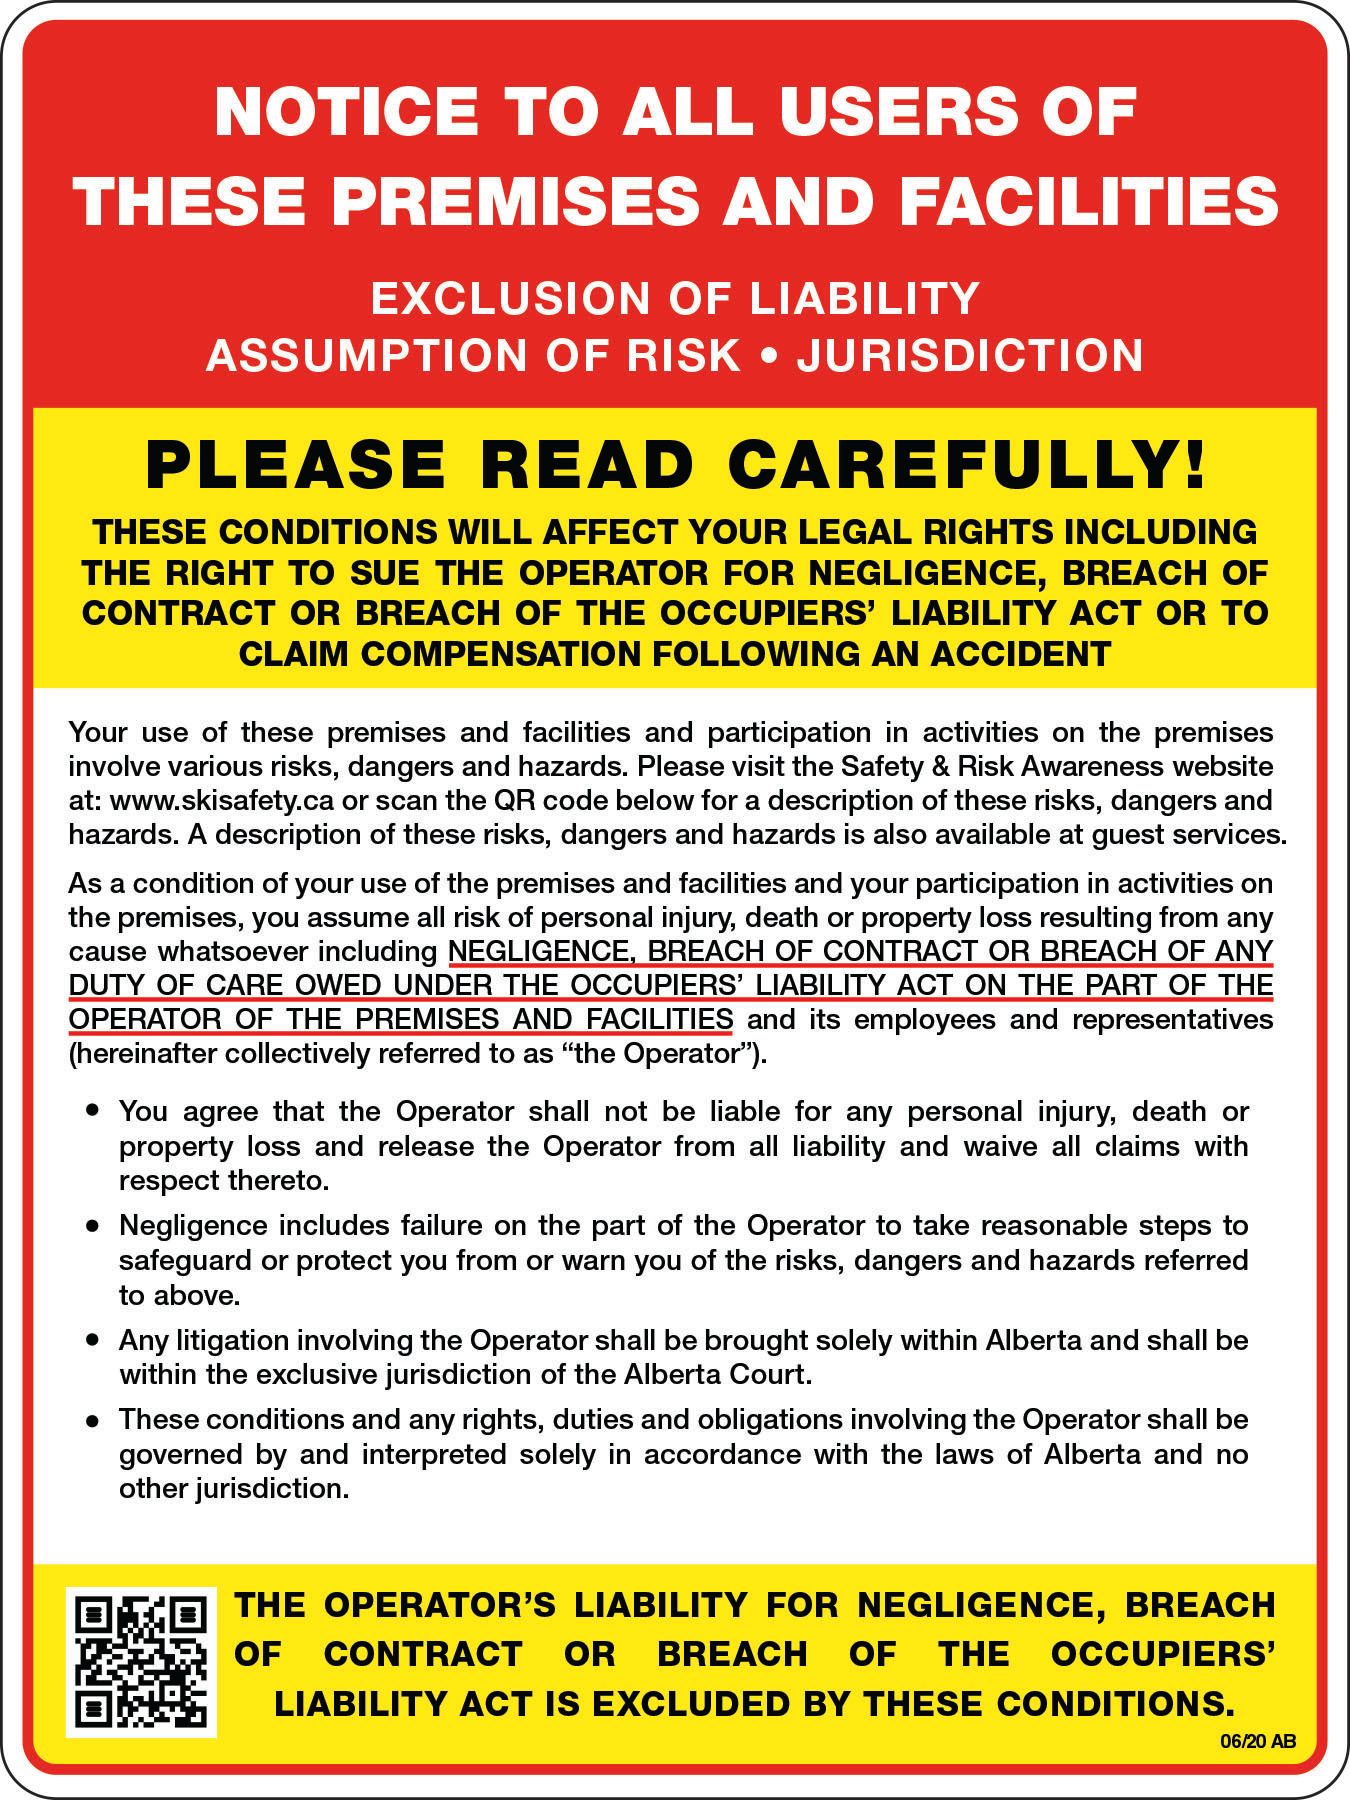 Exclusion of Liability